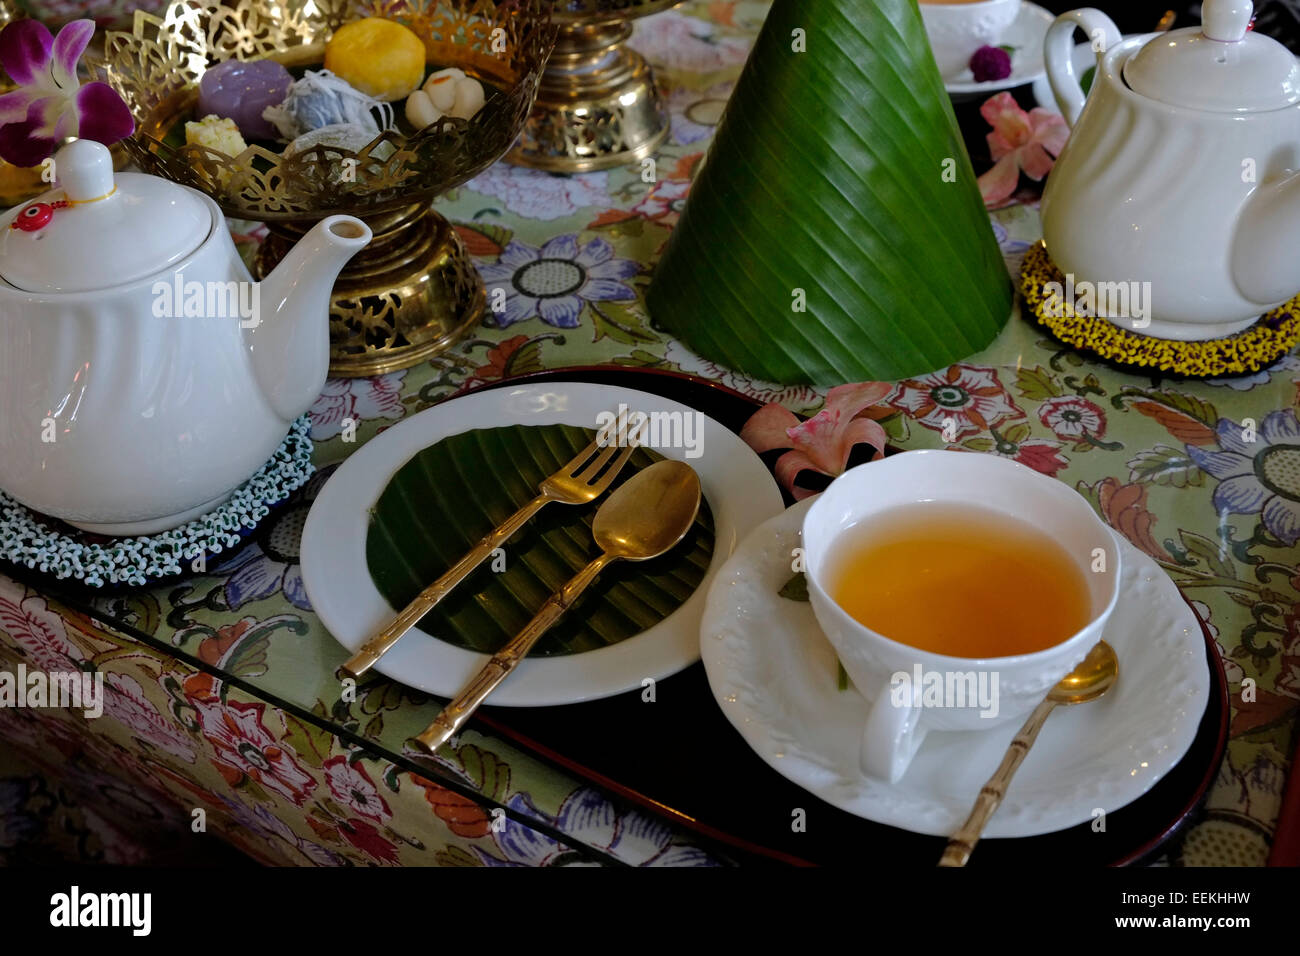 A cup of herbal tea served in the Salon du The cafe in the Museum of Floral Culture focusing on Thai floral culture in Bangkok Thailand Stock Photo